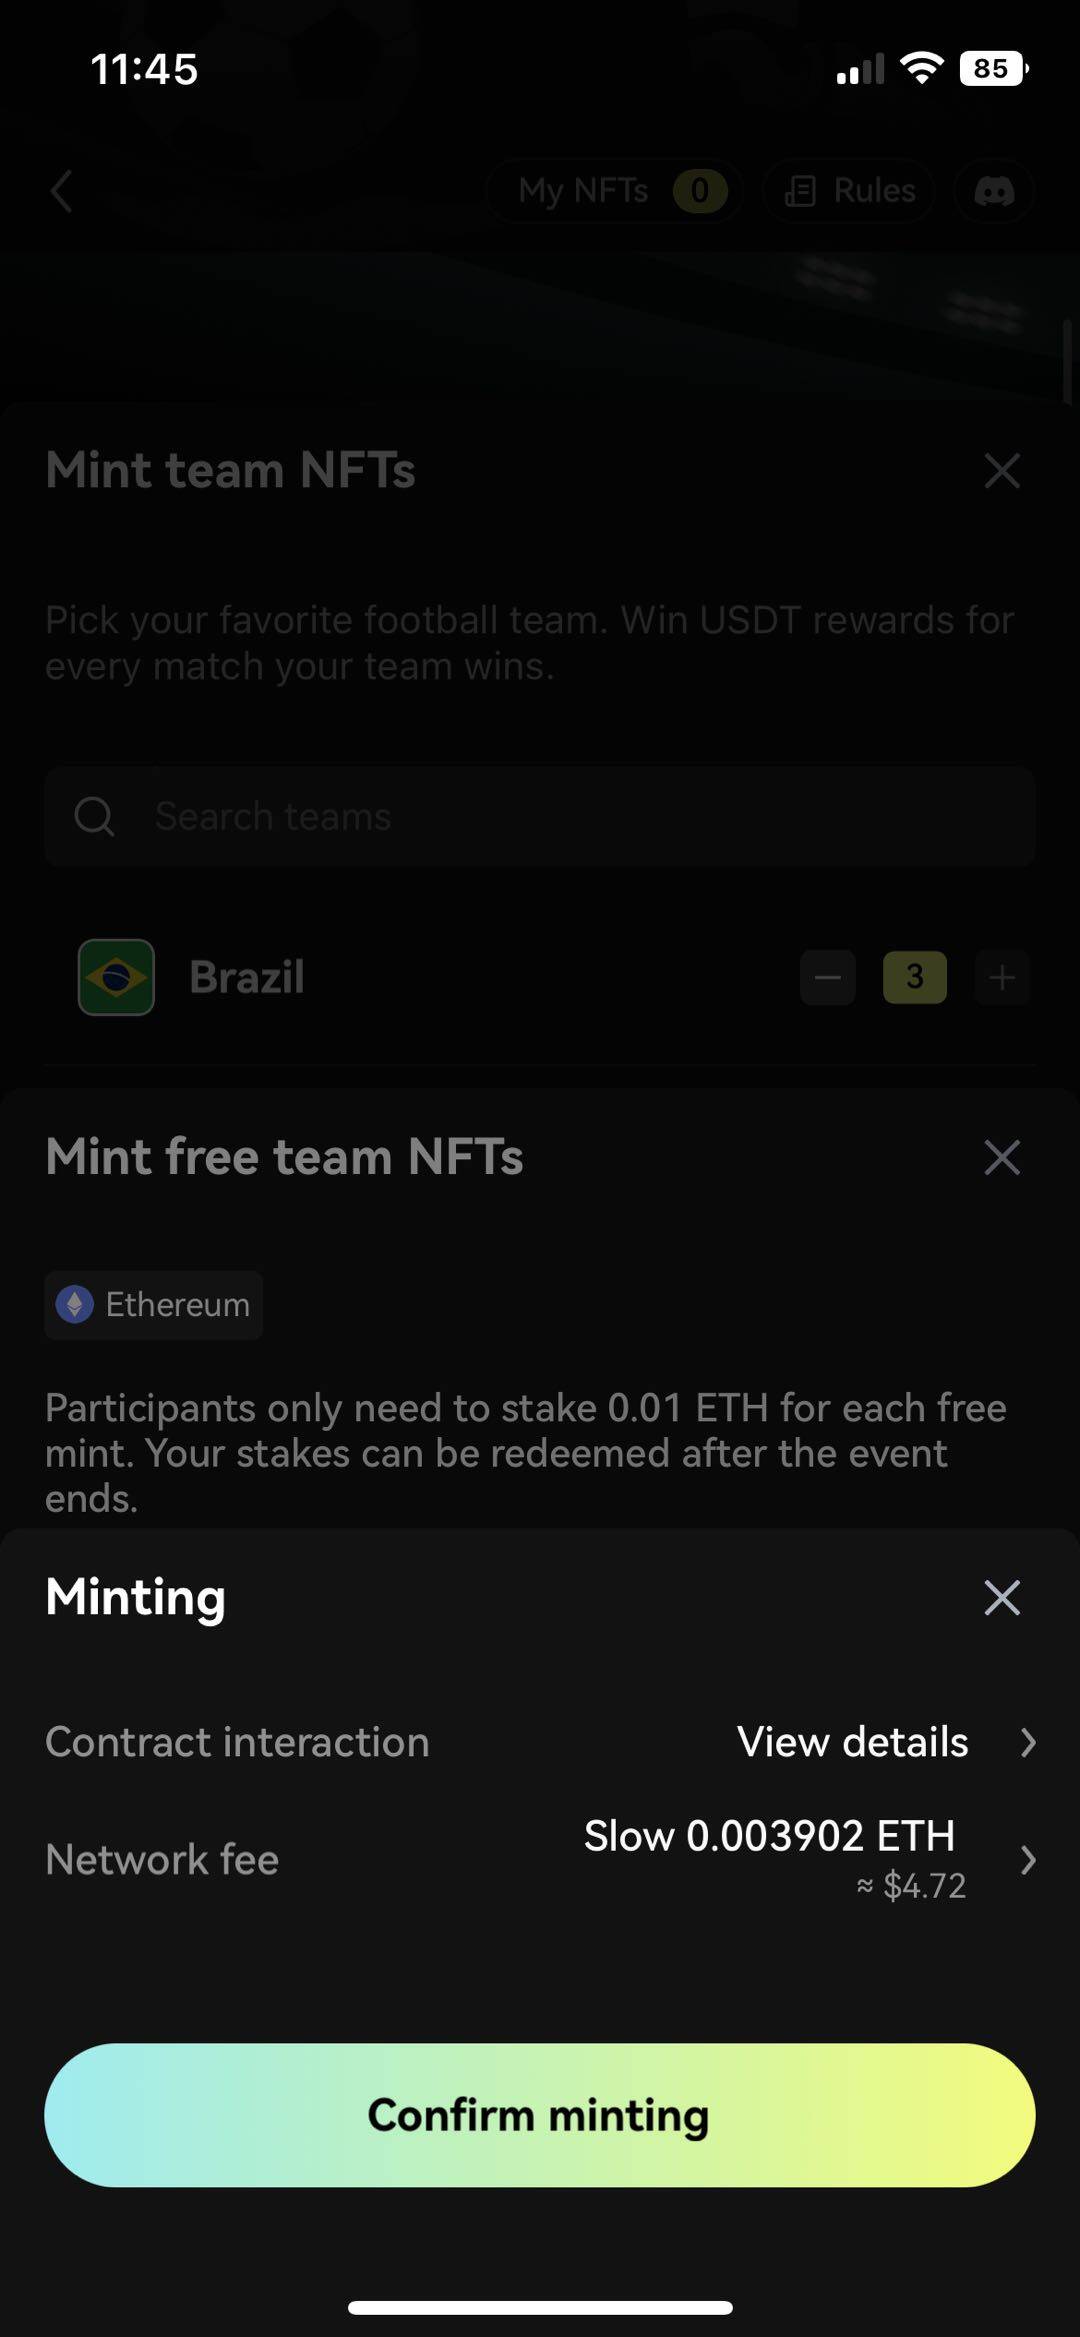 Tap Confirm to mint your NFT